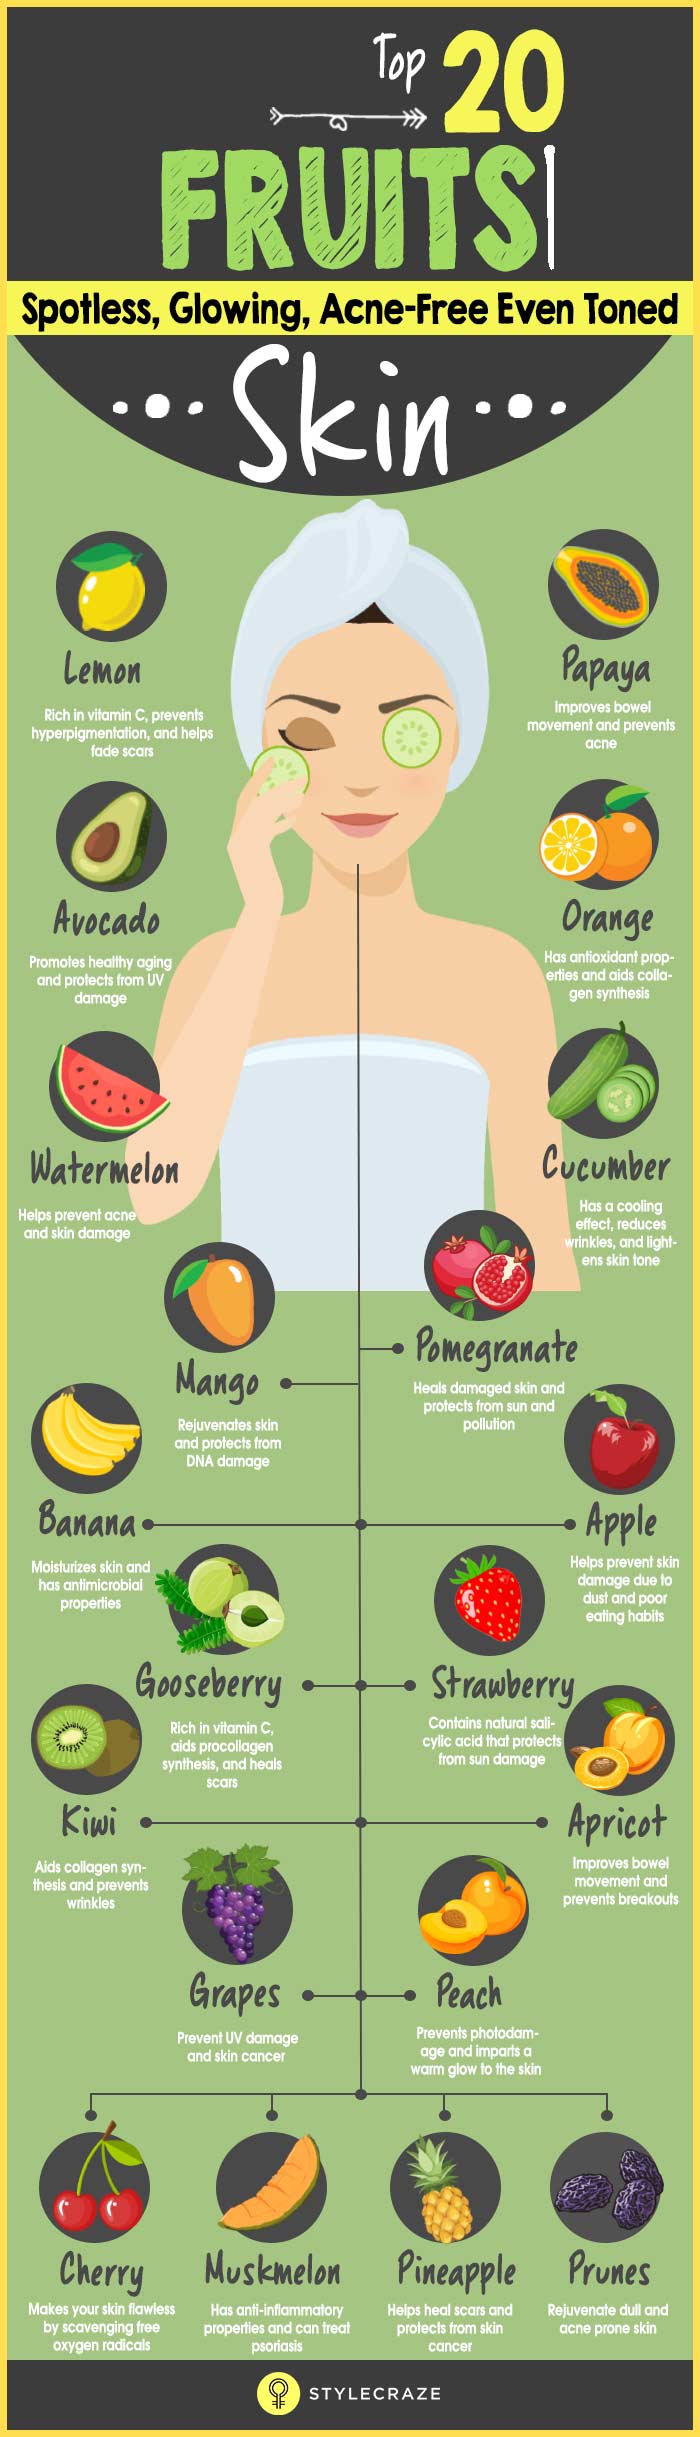 20 Fruits For Glowing Skin